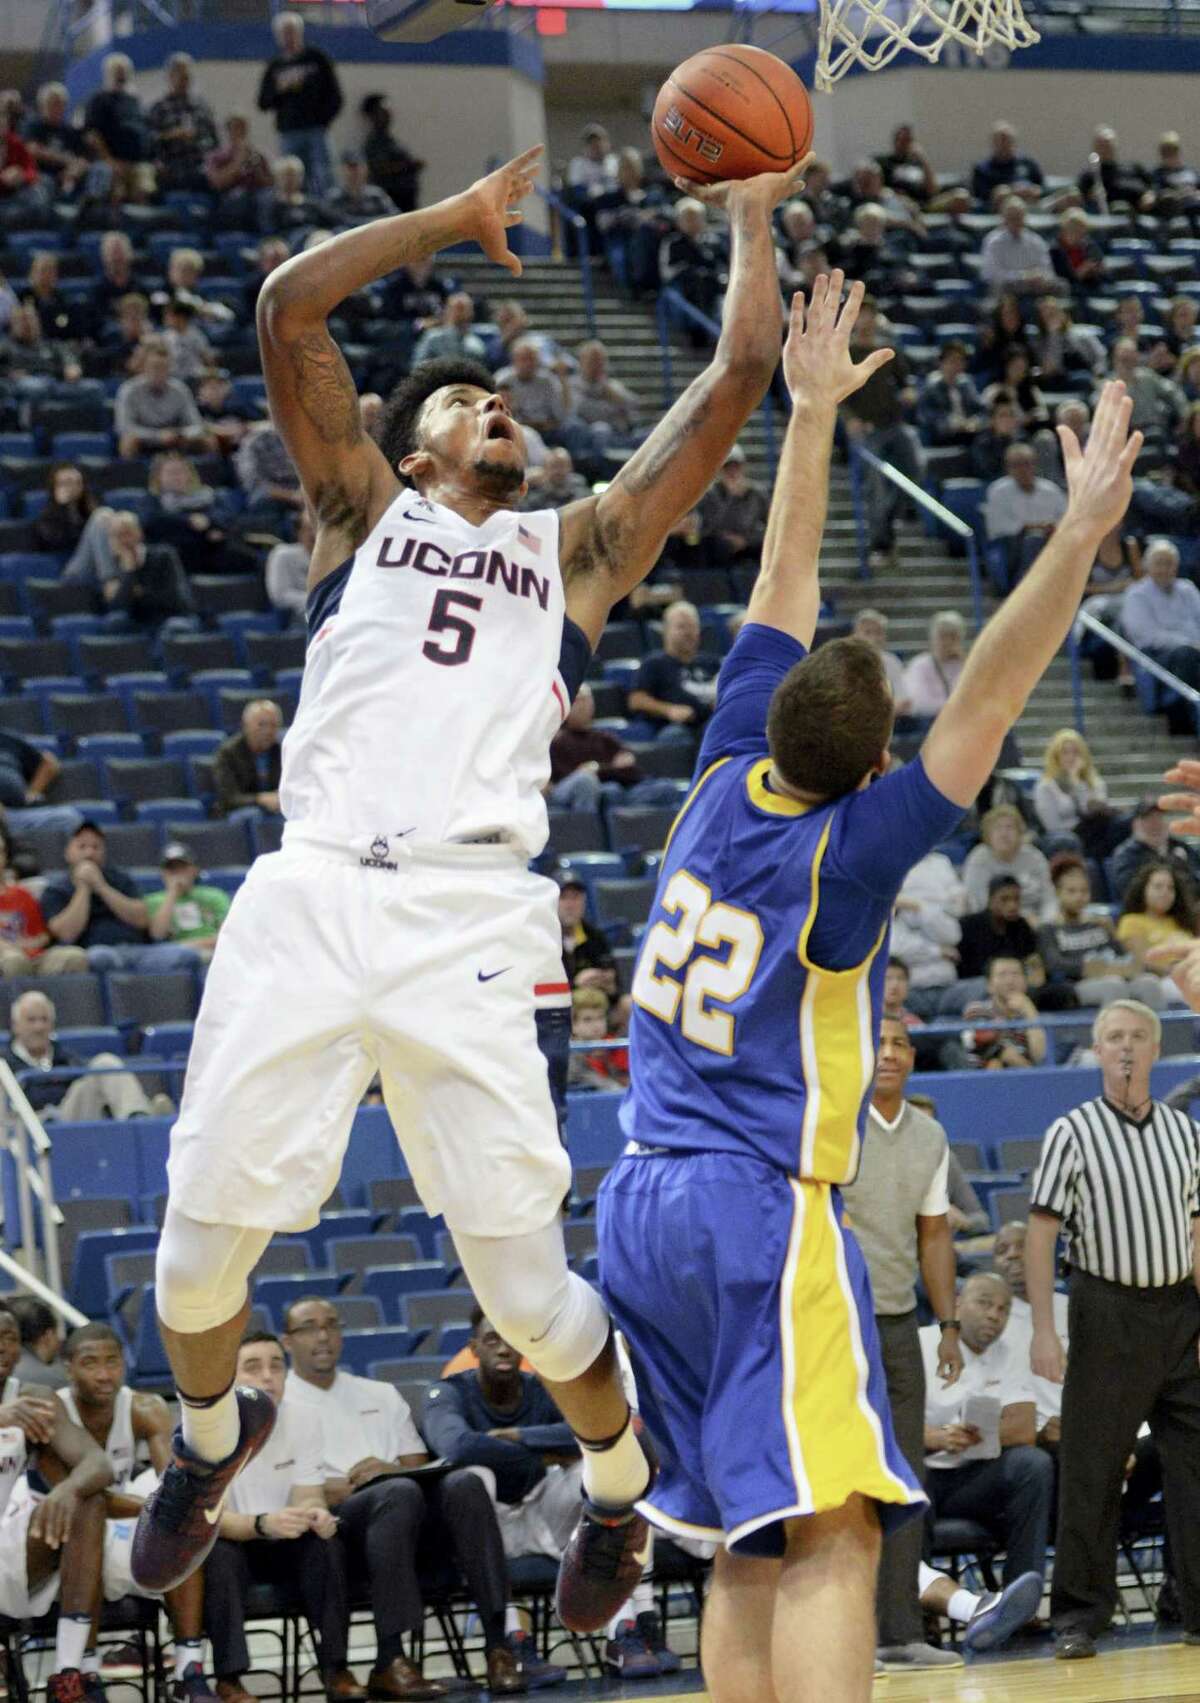 UConn’s Vance Jackson shoots over New Haven’s Tommy Hunt during the second half on Sunday.